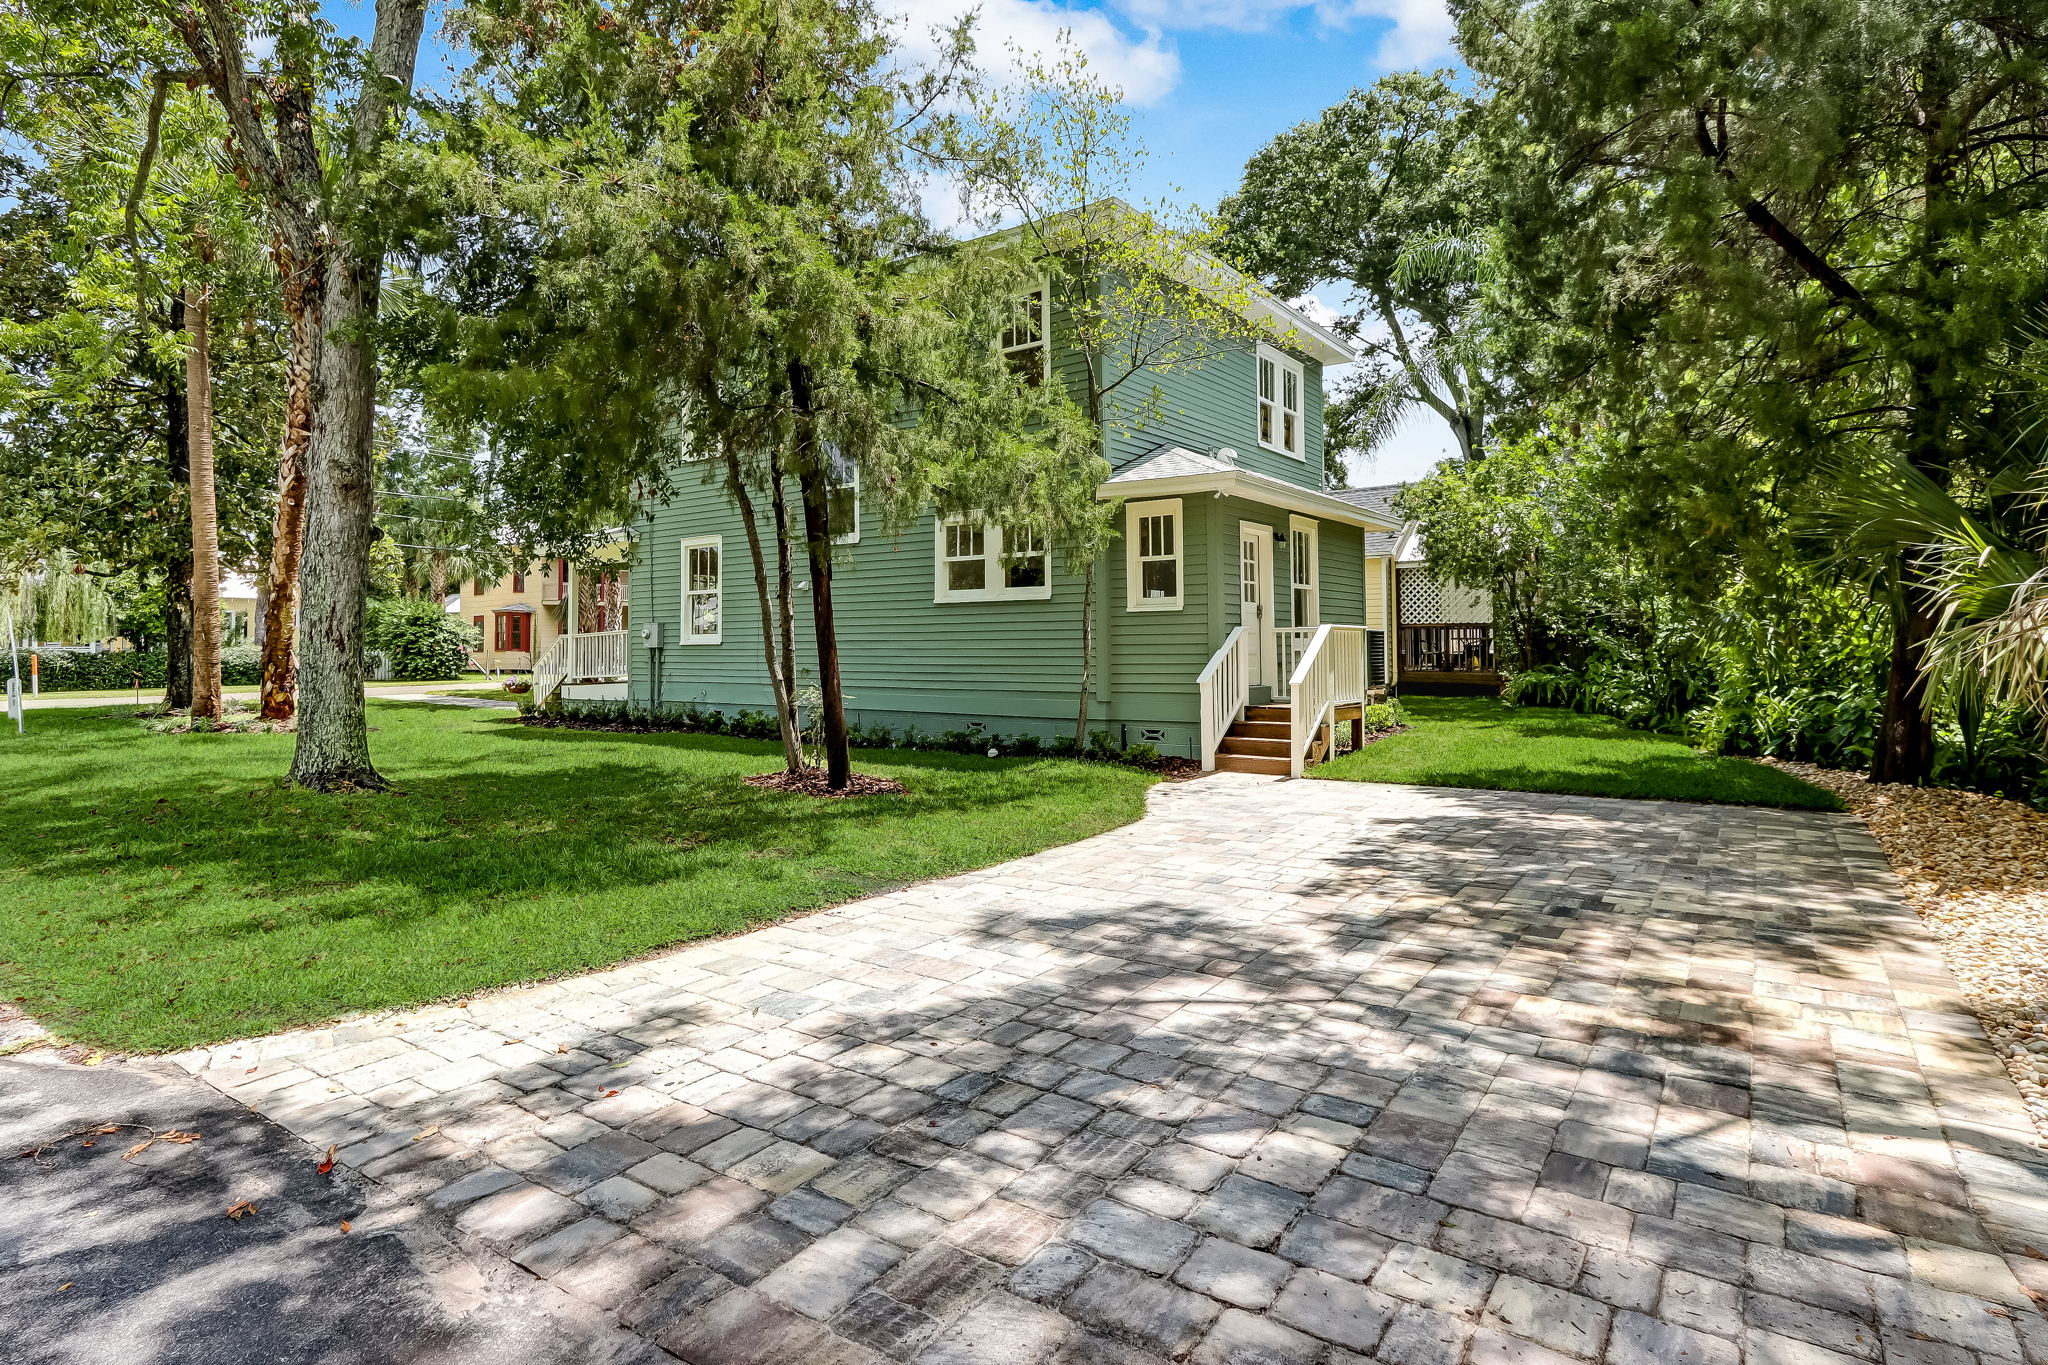 Pavered driveway and walkway add to a compelling curb appeal!